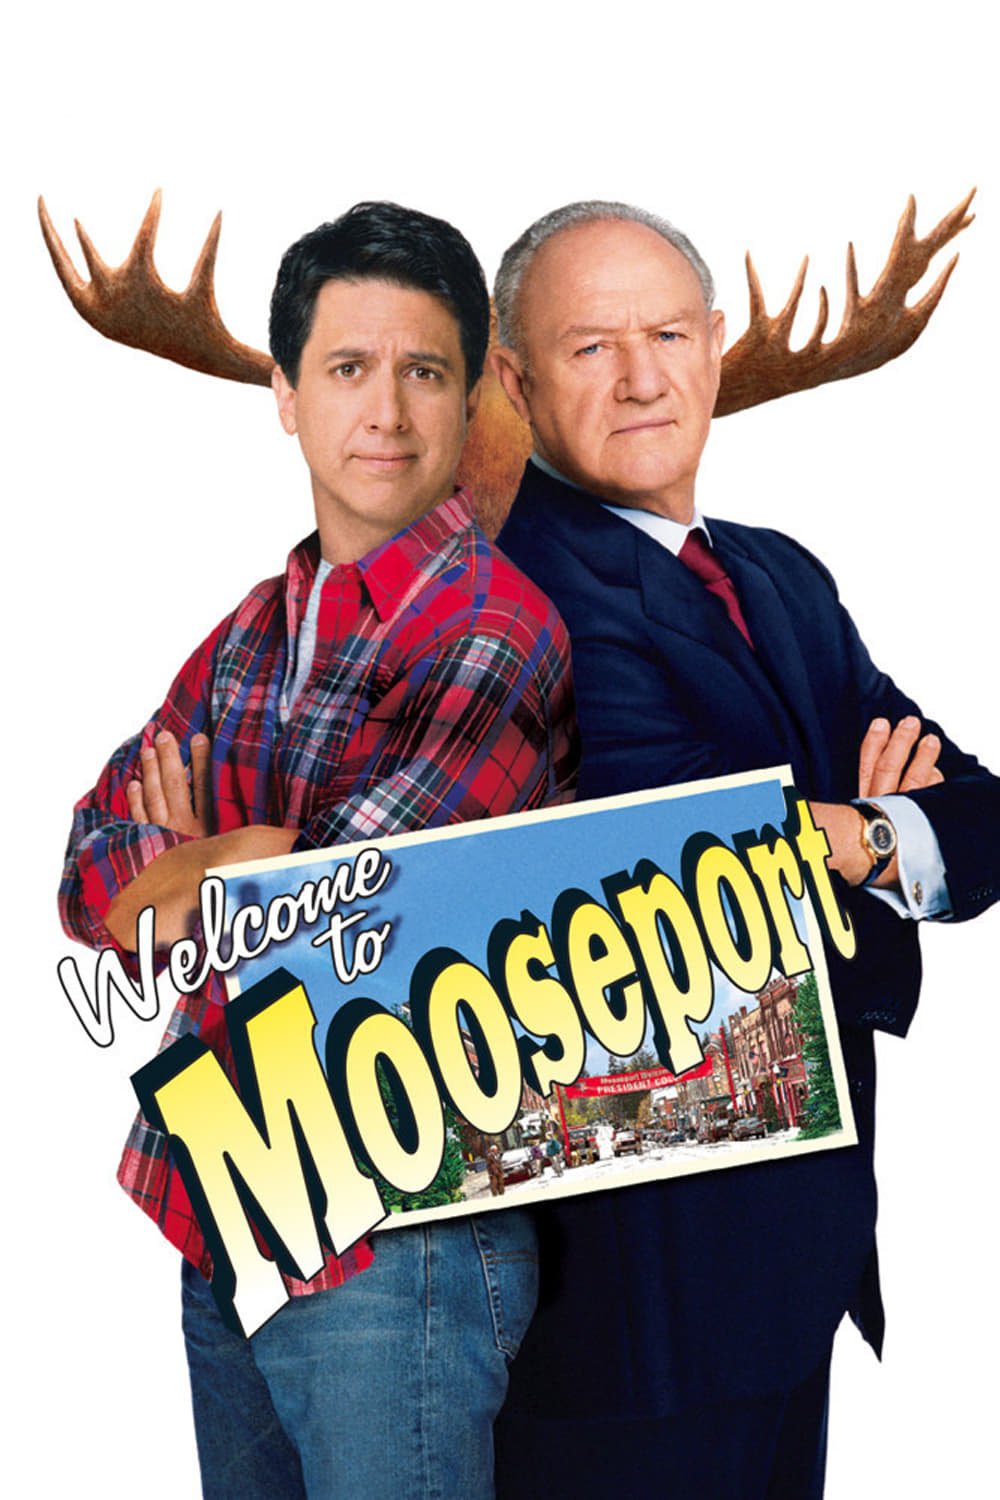 Poster for the movie "Welcome to Mooseport"